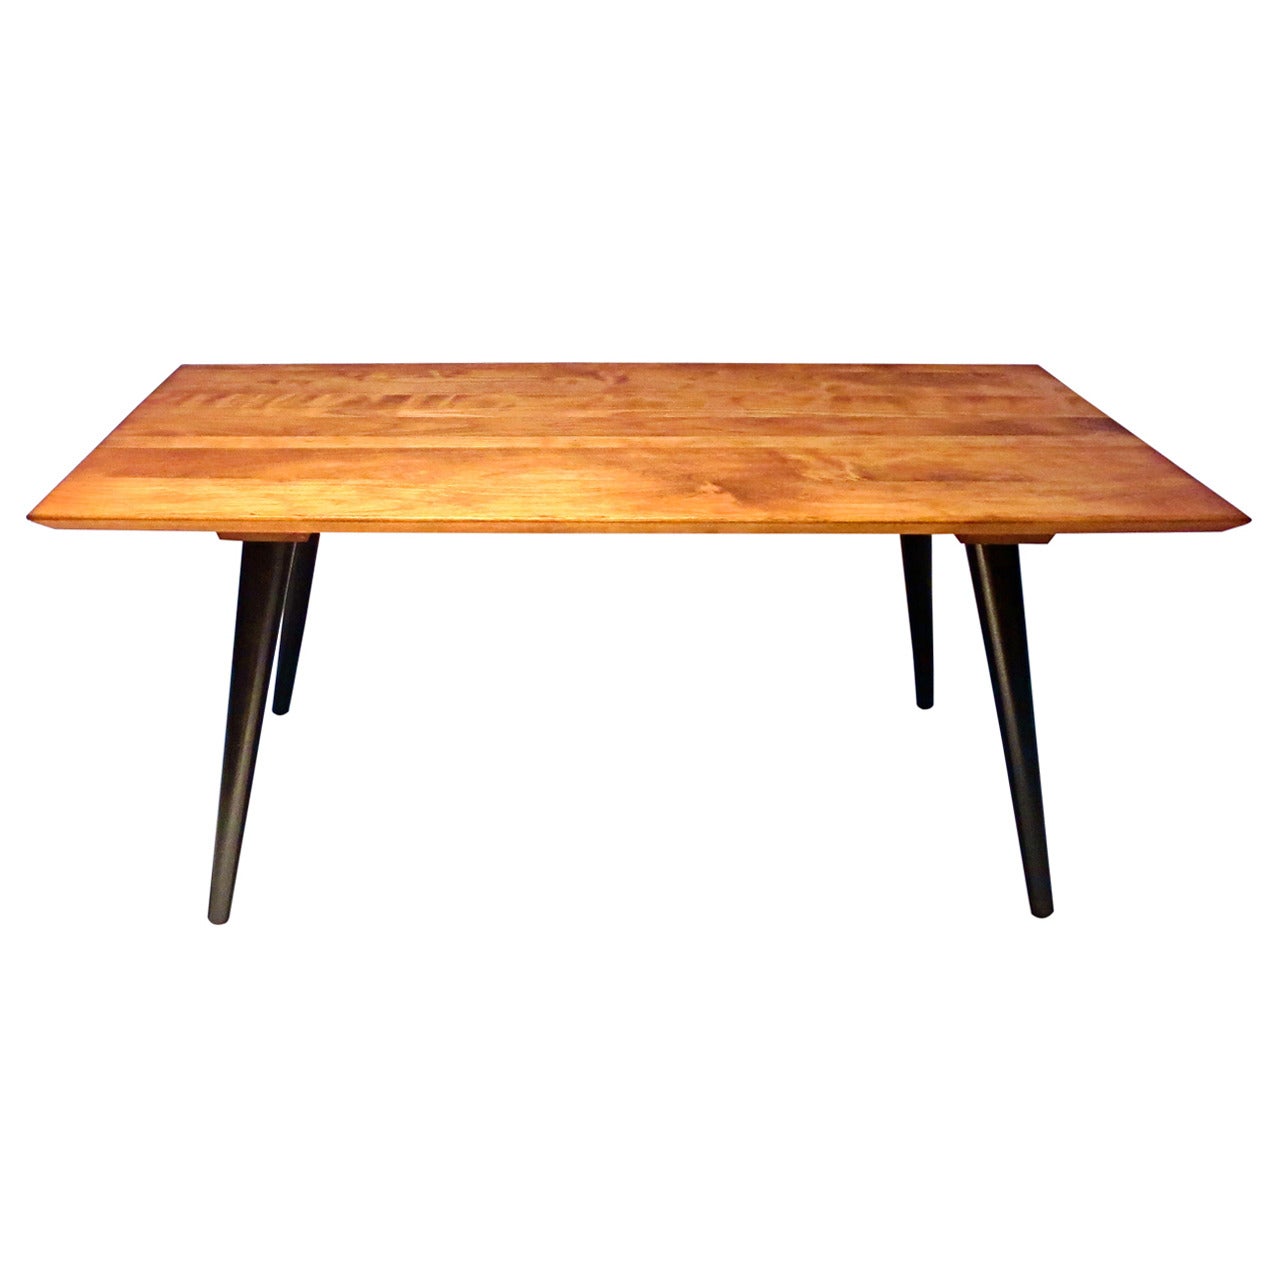 American Modern small coffee table by Paul McCobb for Winchendon early prod.